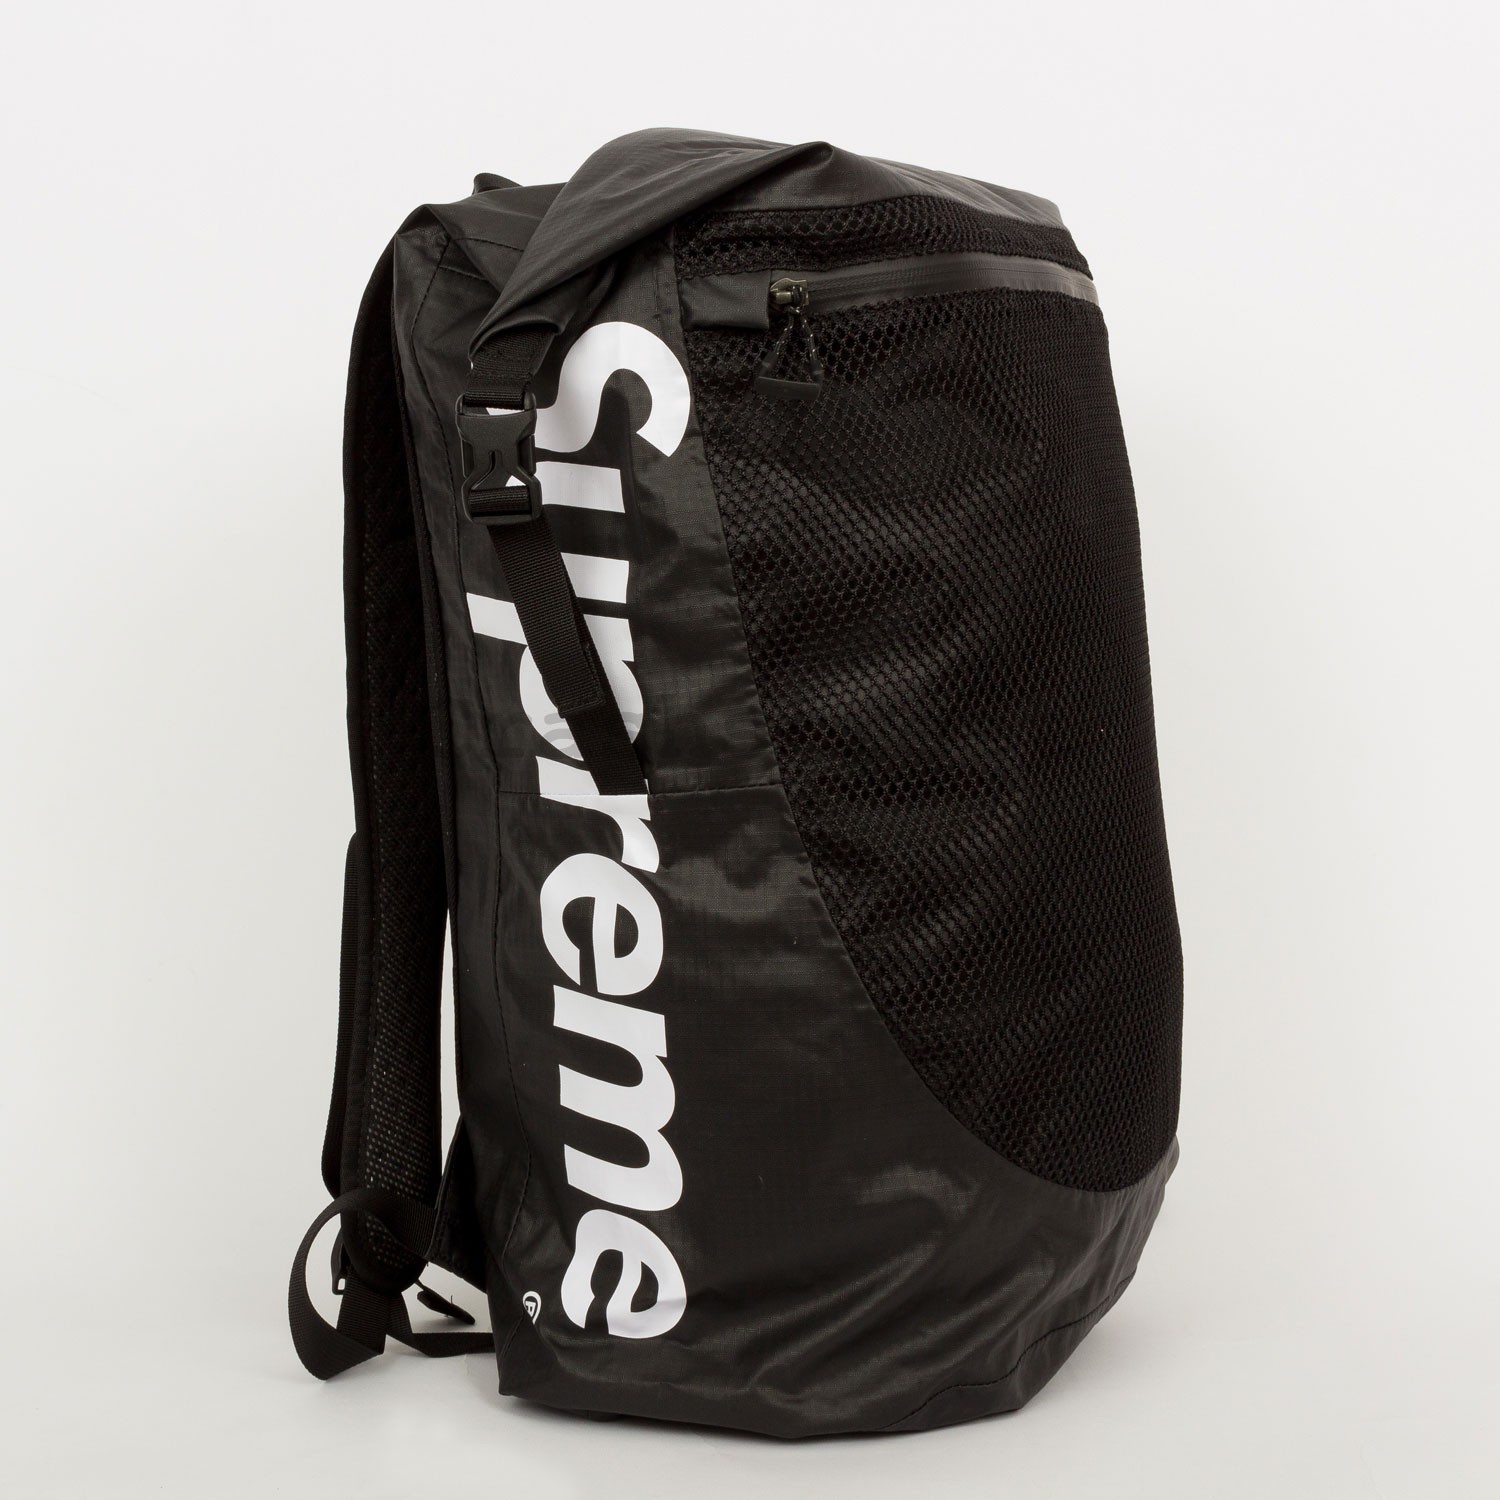 A+ Replica Supreme x The North Face Waterproof Backpack